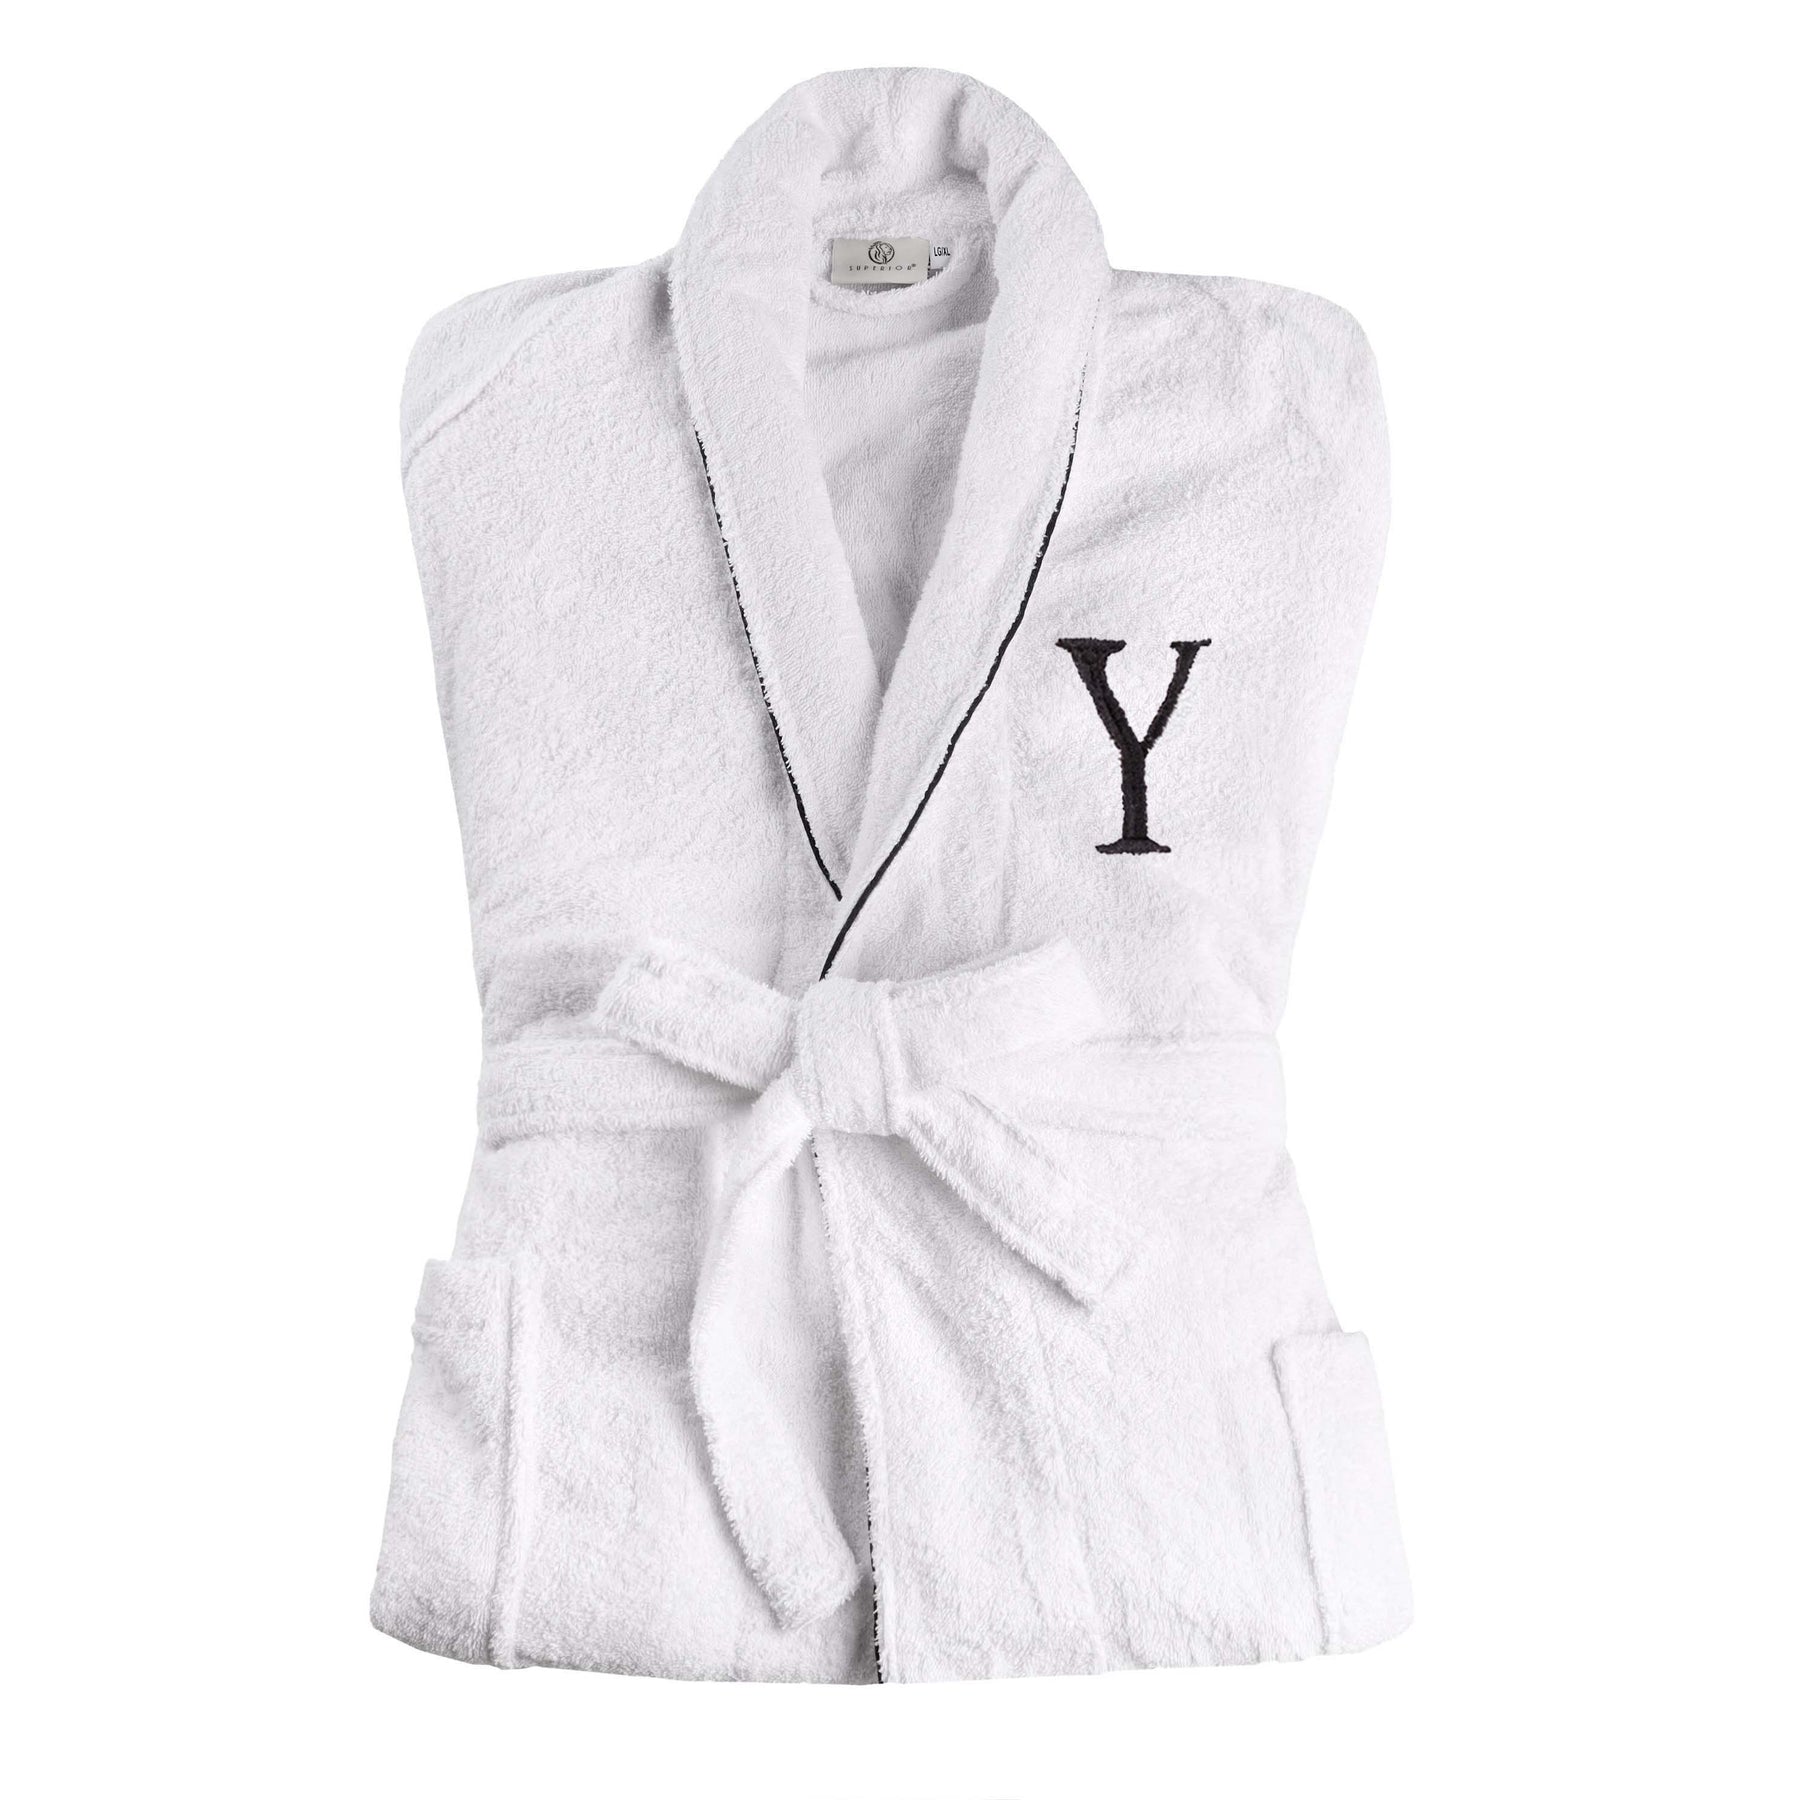 Cotton Adult Unisex Embroidered Fluffy Bathrobe White - Letter Y